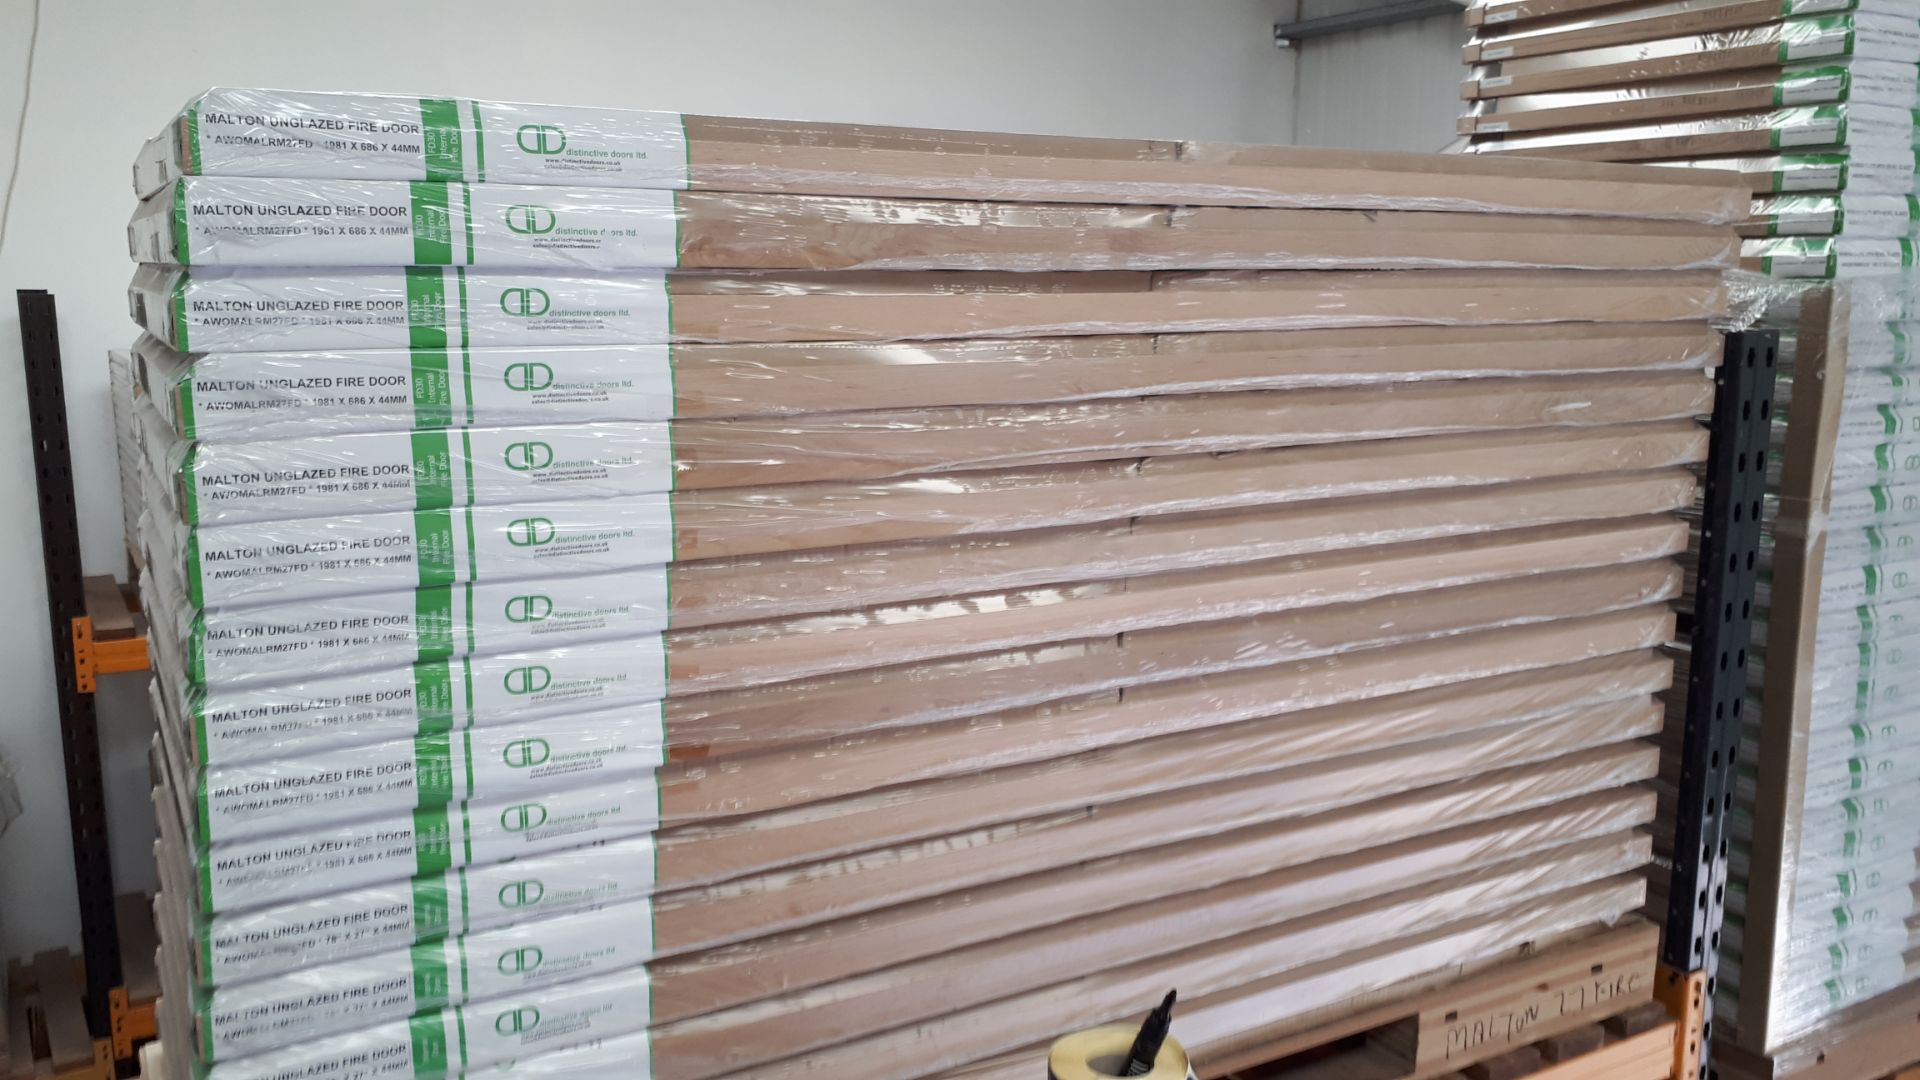 4 x Malton Unglazed Internal Fire Door AWOMLRM27FD 78”x27”x44mm - Lots to be handed out in order